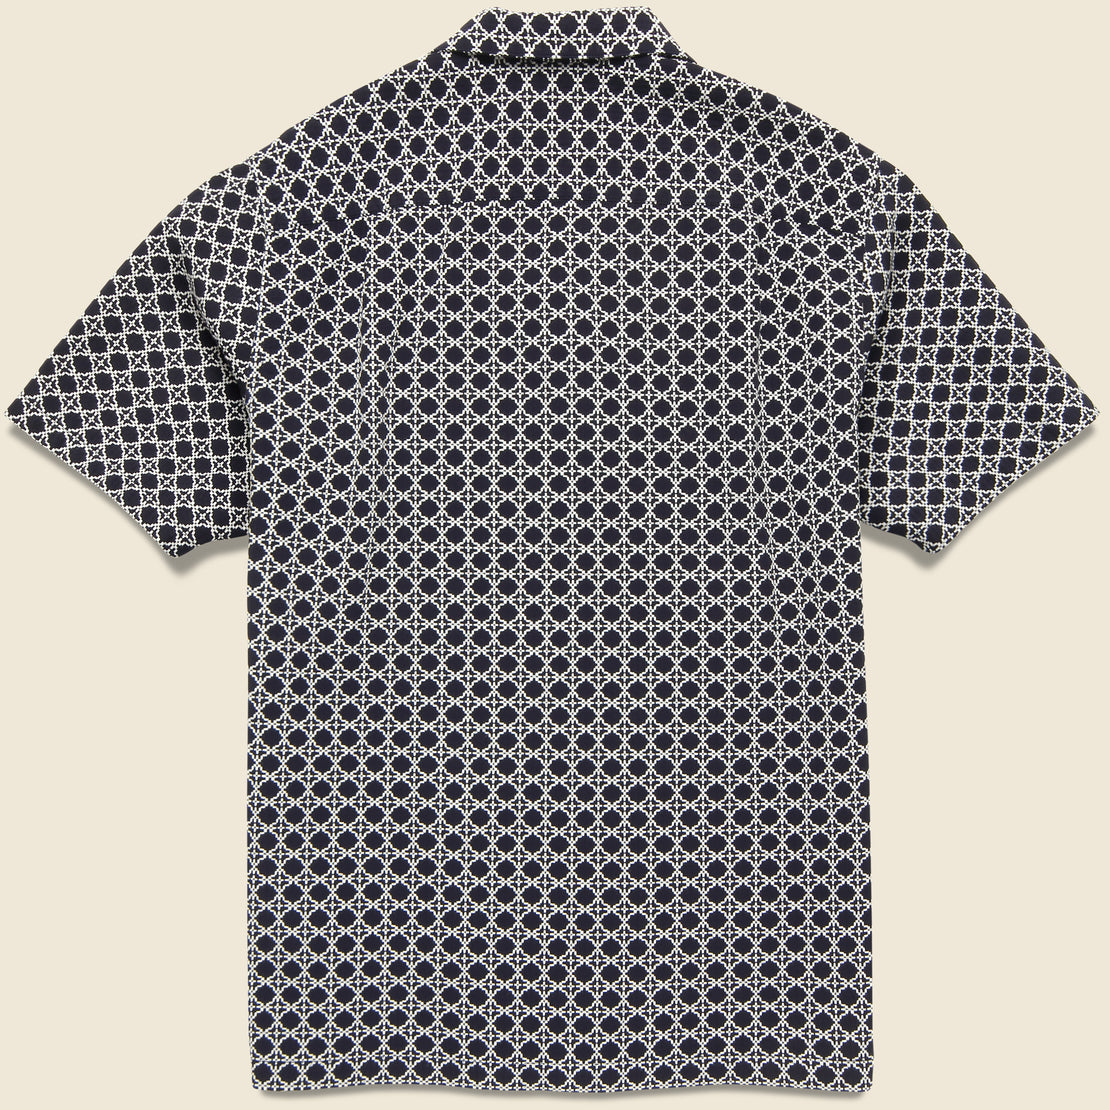 Tile Camp Shirt - Navy - Portuguese Flannel - STAG Provisions - Tops - S/S Woven - Other Pattern